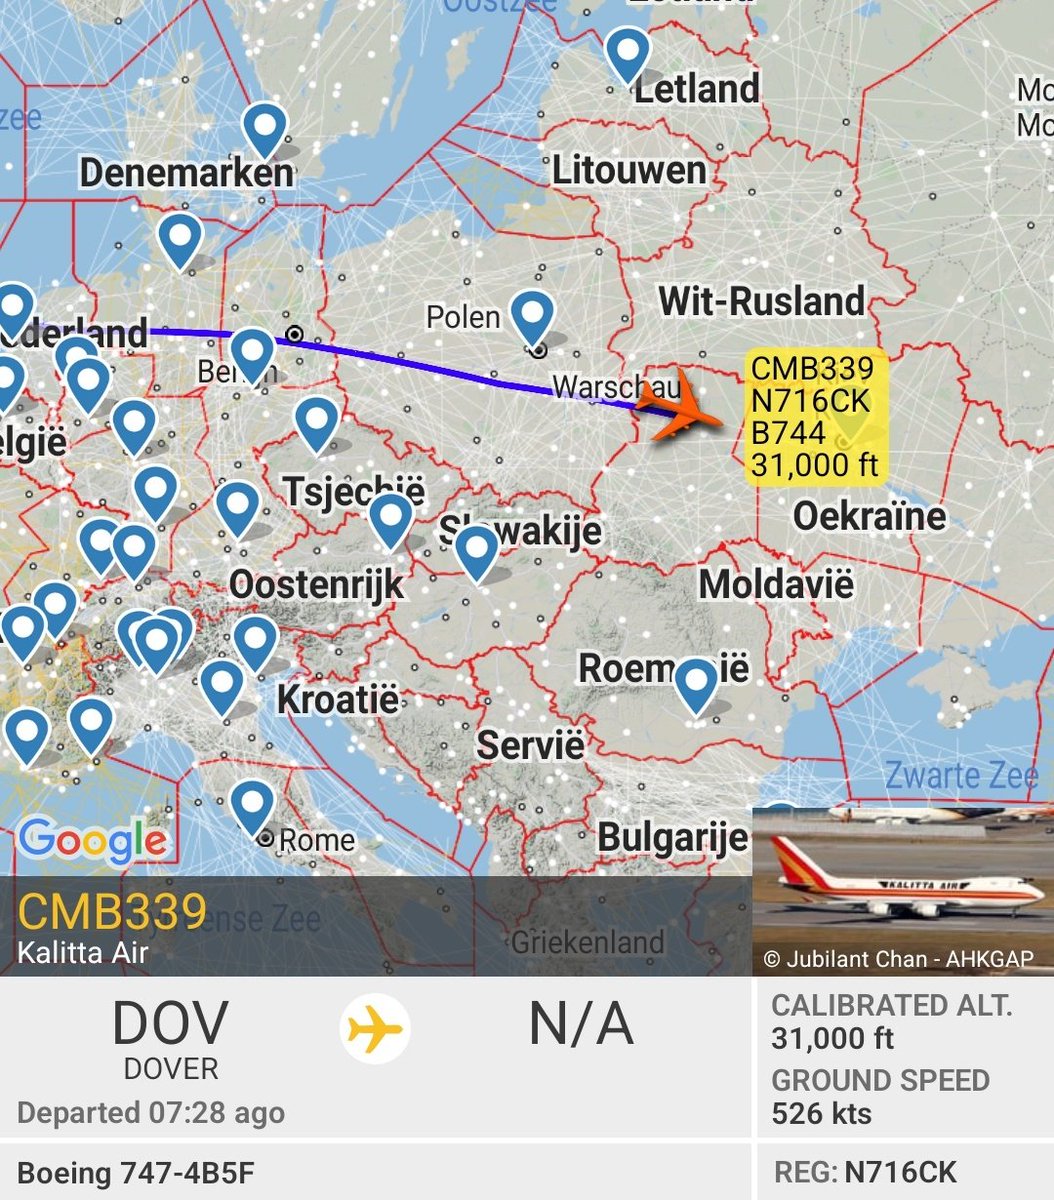 Kalitta Air N716CK (U.S. Transportation Command flight CMB339) is now over Ukraine, destination Kyiv Boryspil Airport seems increasingly likely.  Photo by @SpotterPD